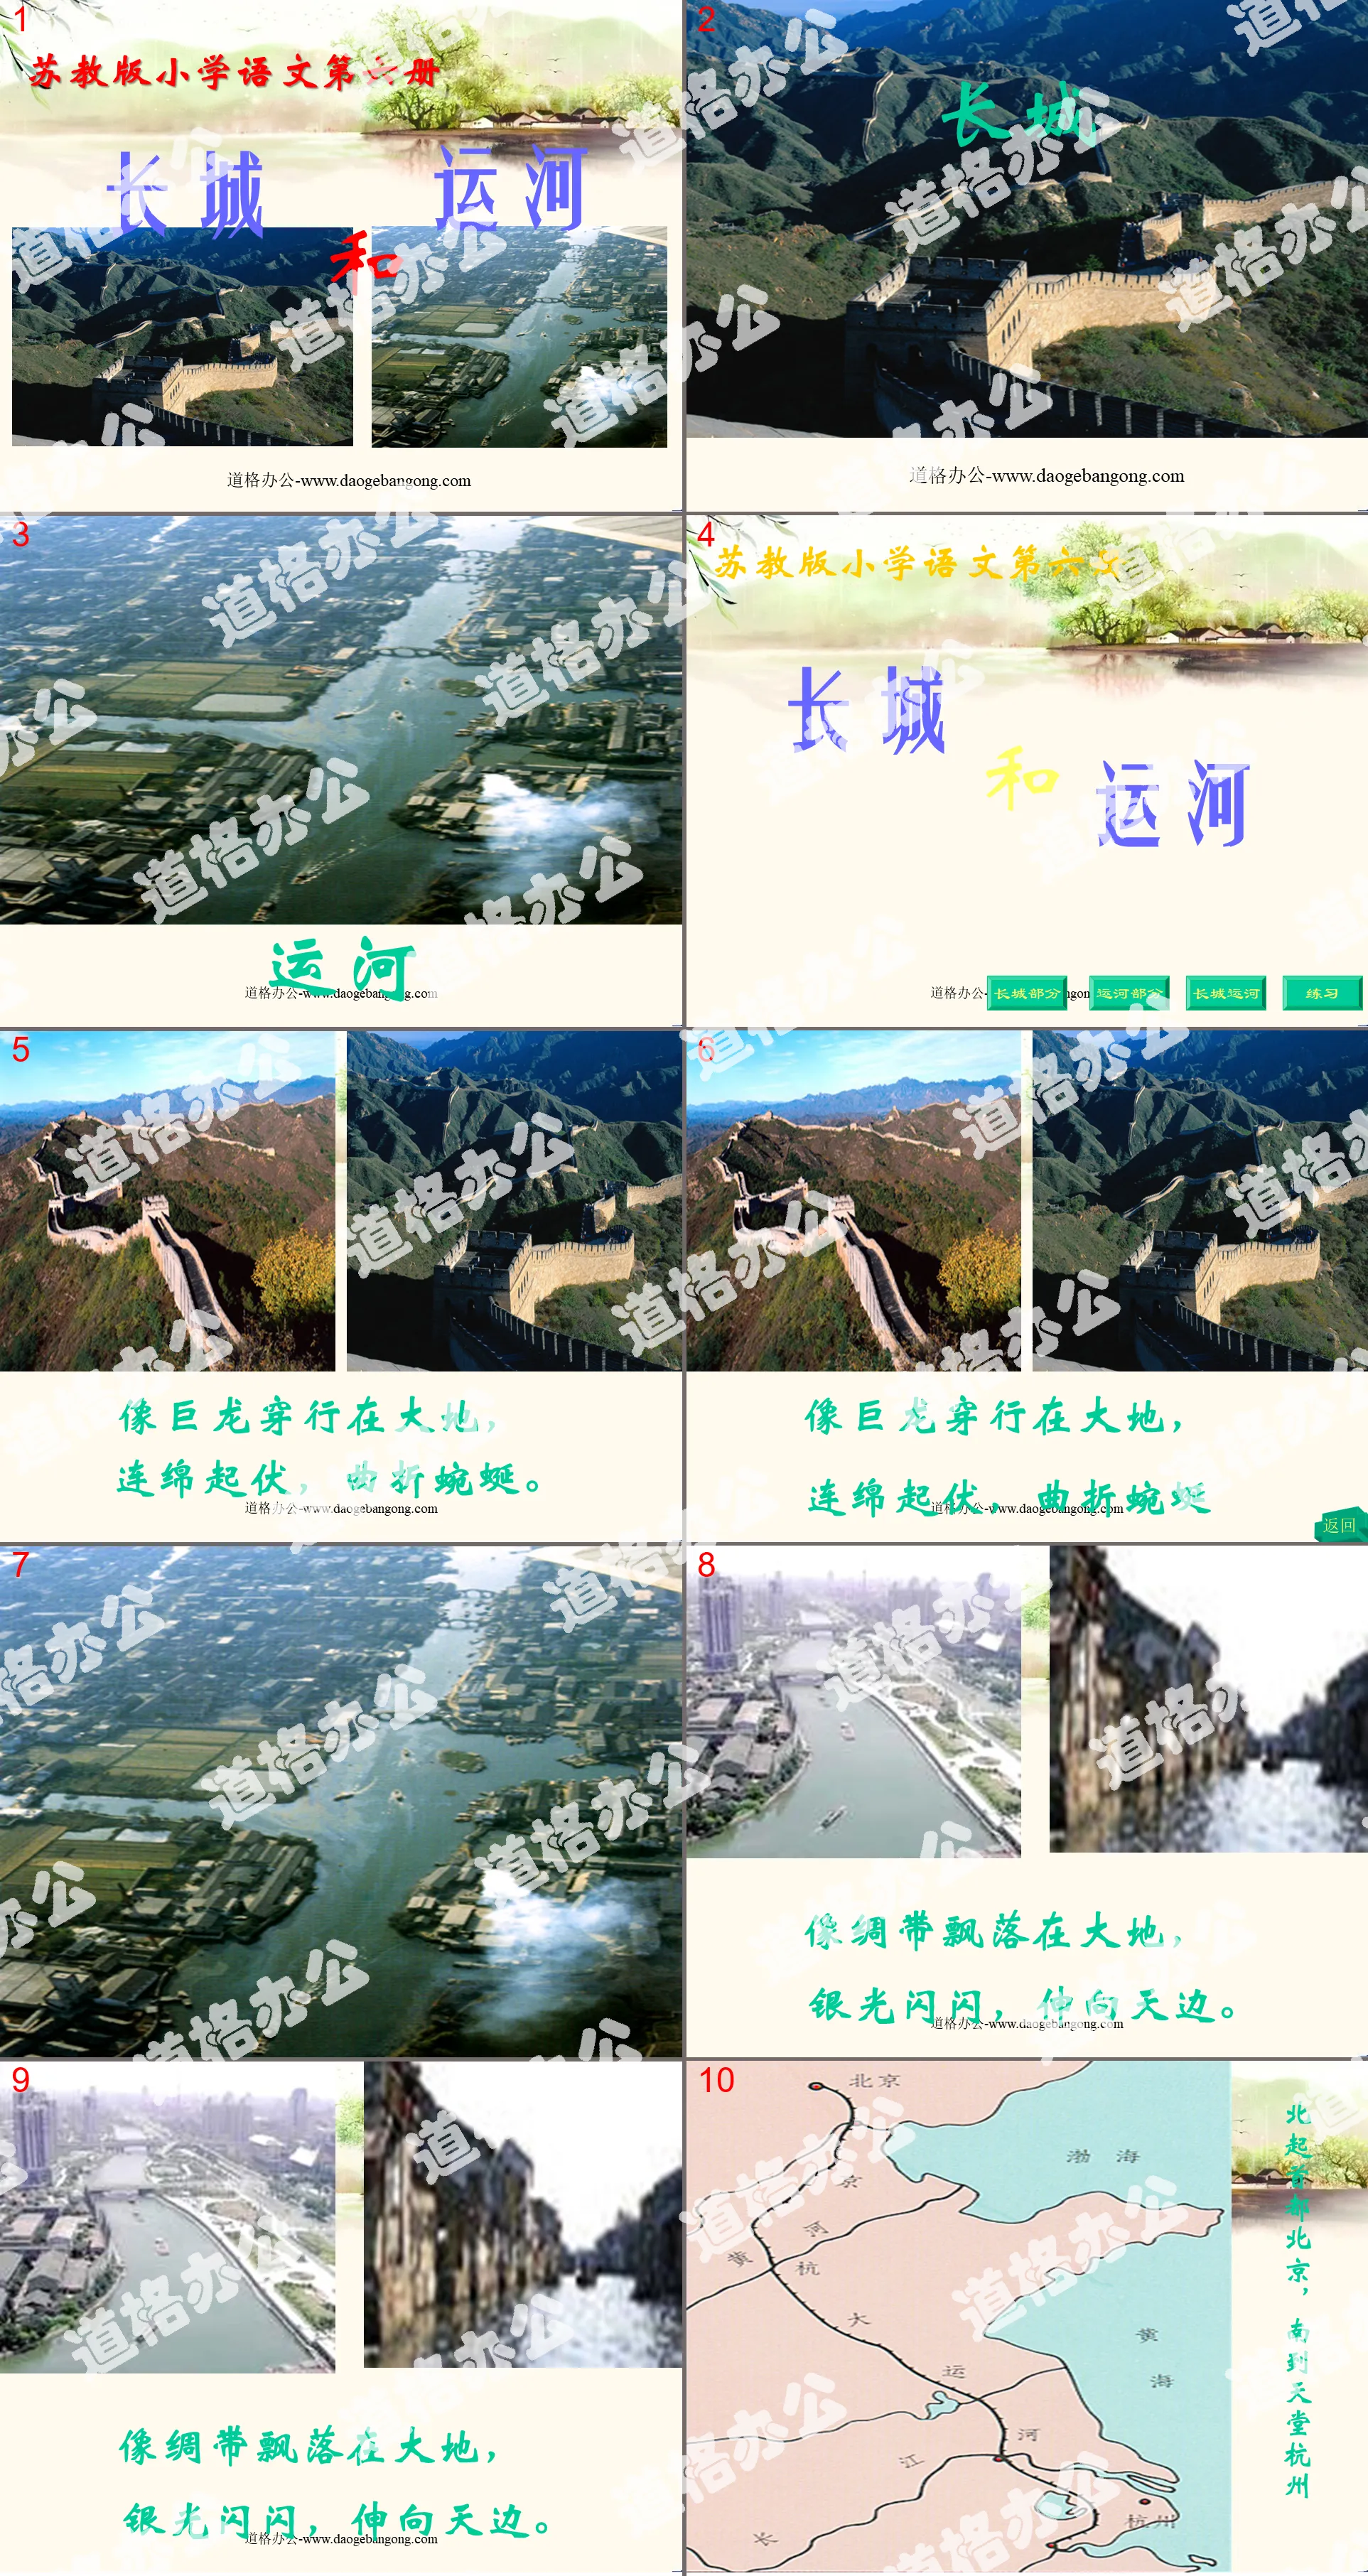 "The Great Wall and Canals" PPT courseware